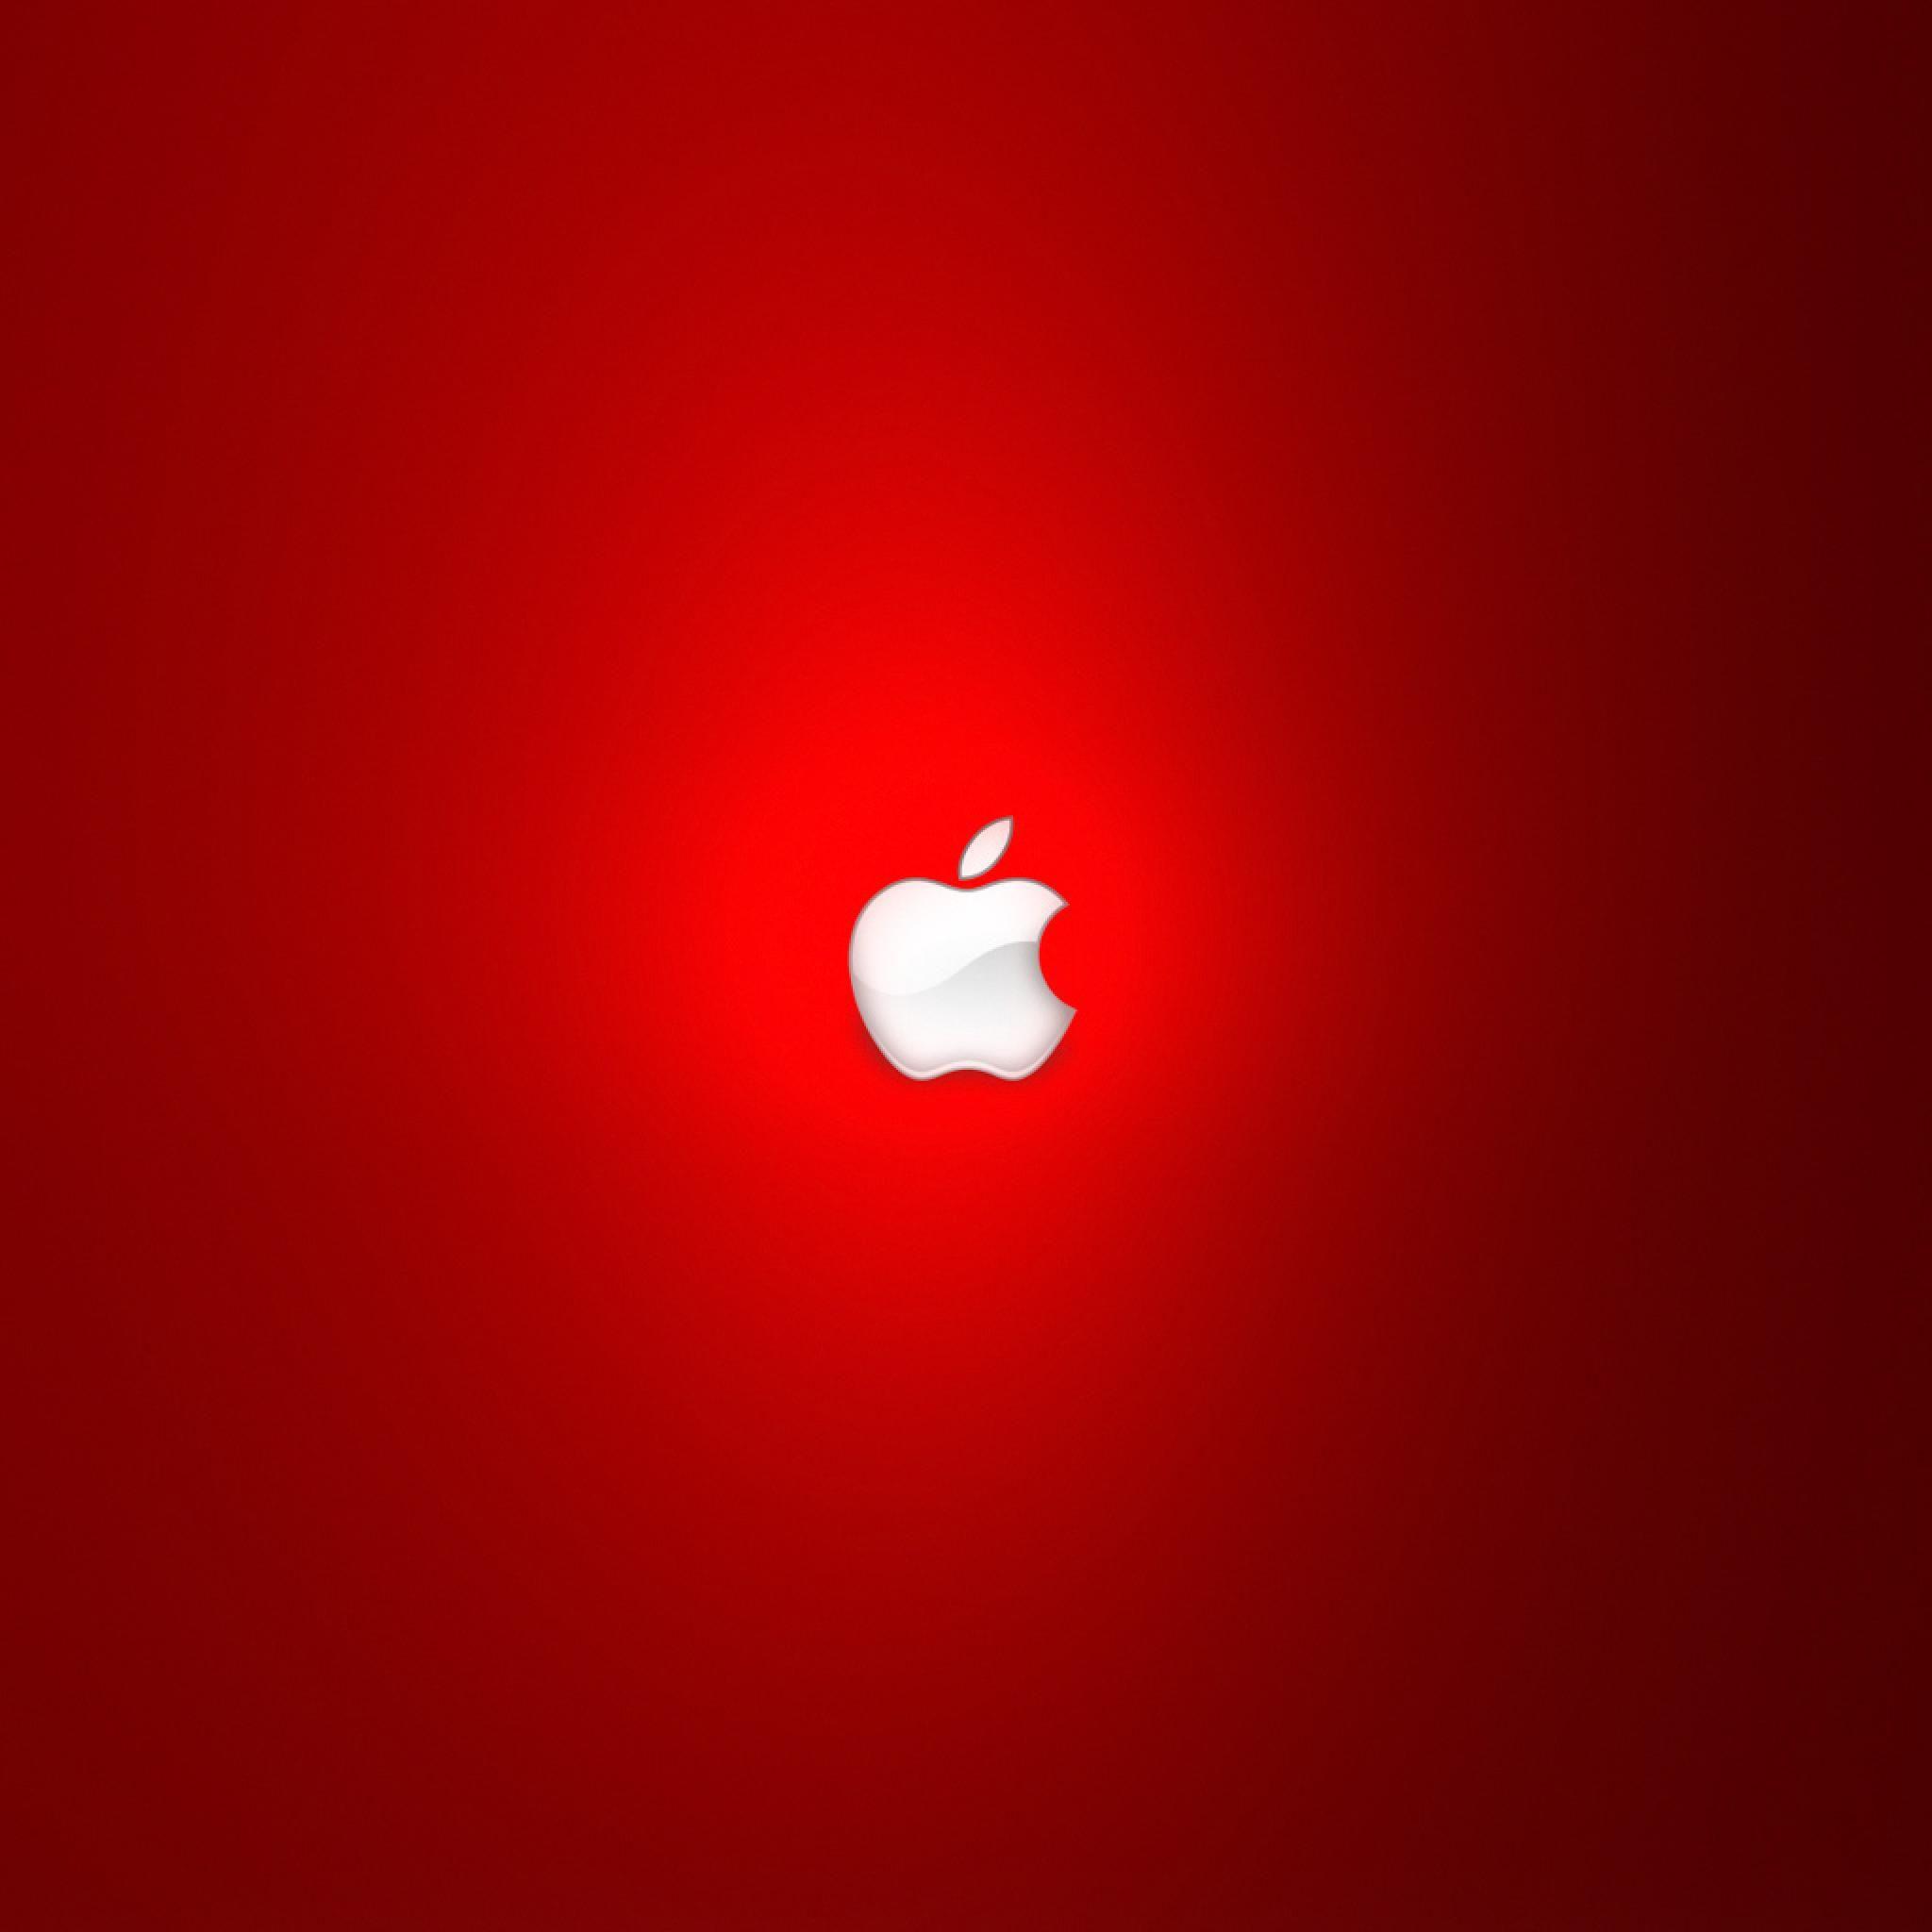 Computers Logo Strong Red Hue iPhone HD Wallpaper Free